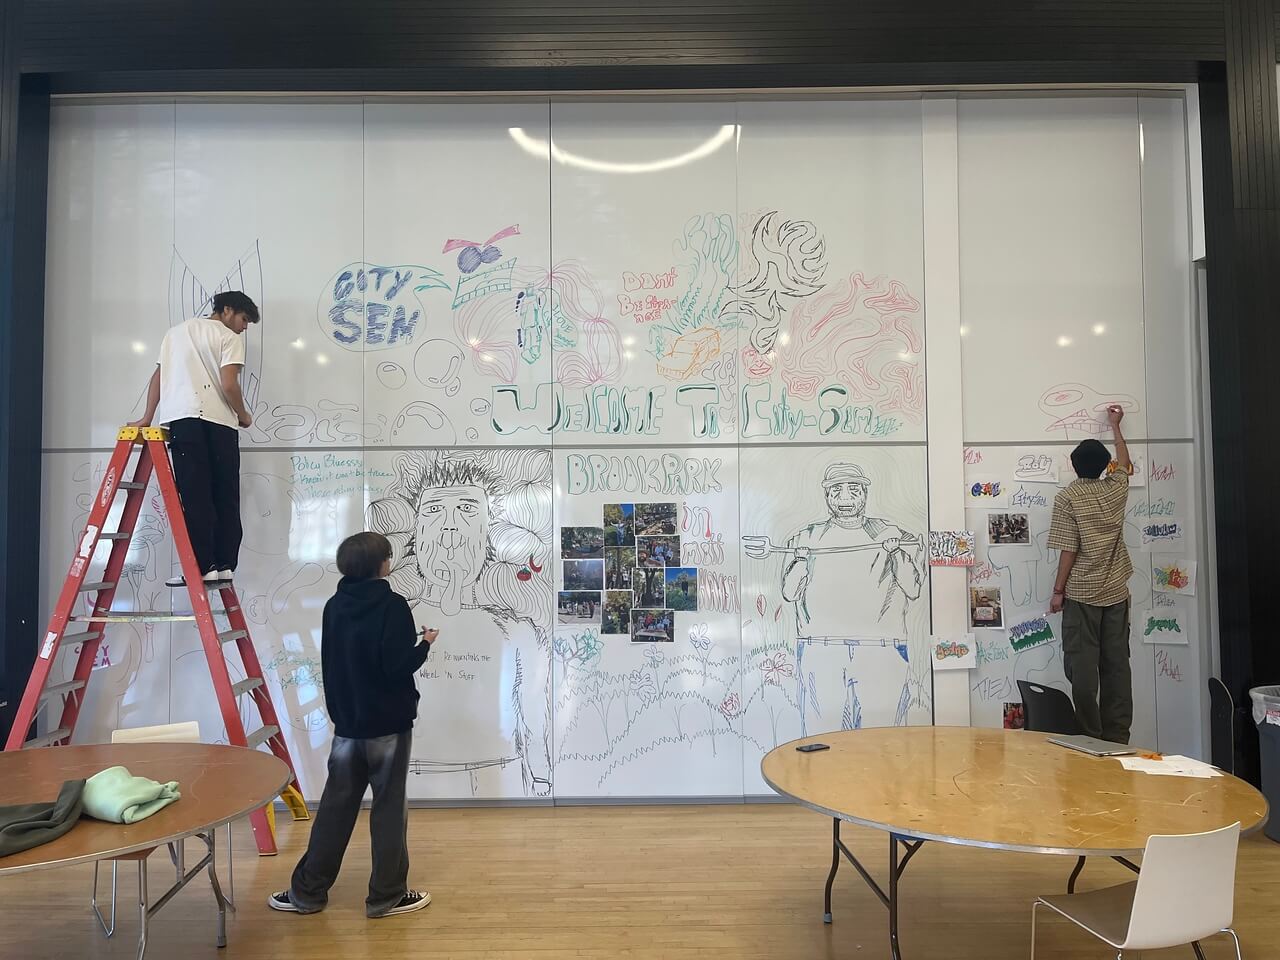 Photo of CitySem students working on mural whiteboard in the Student Commons.